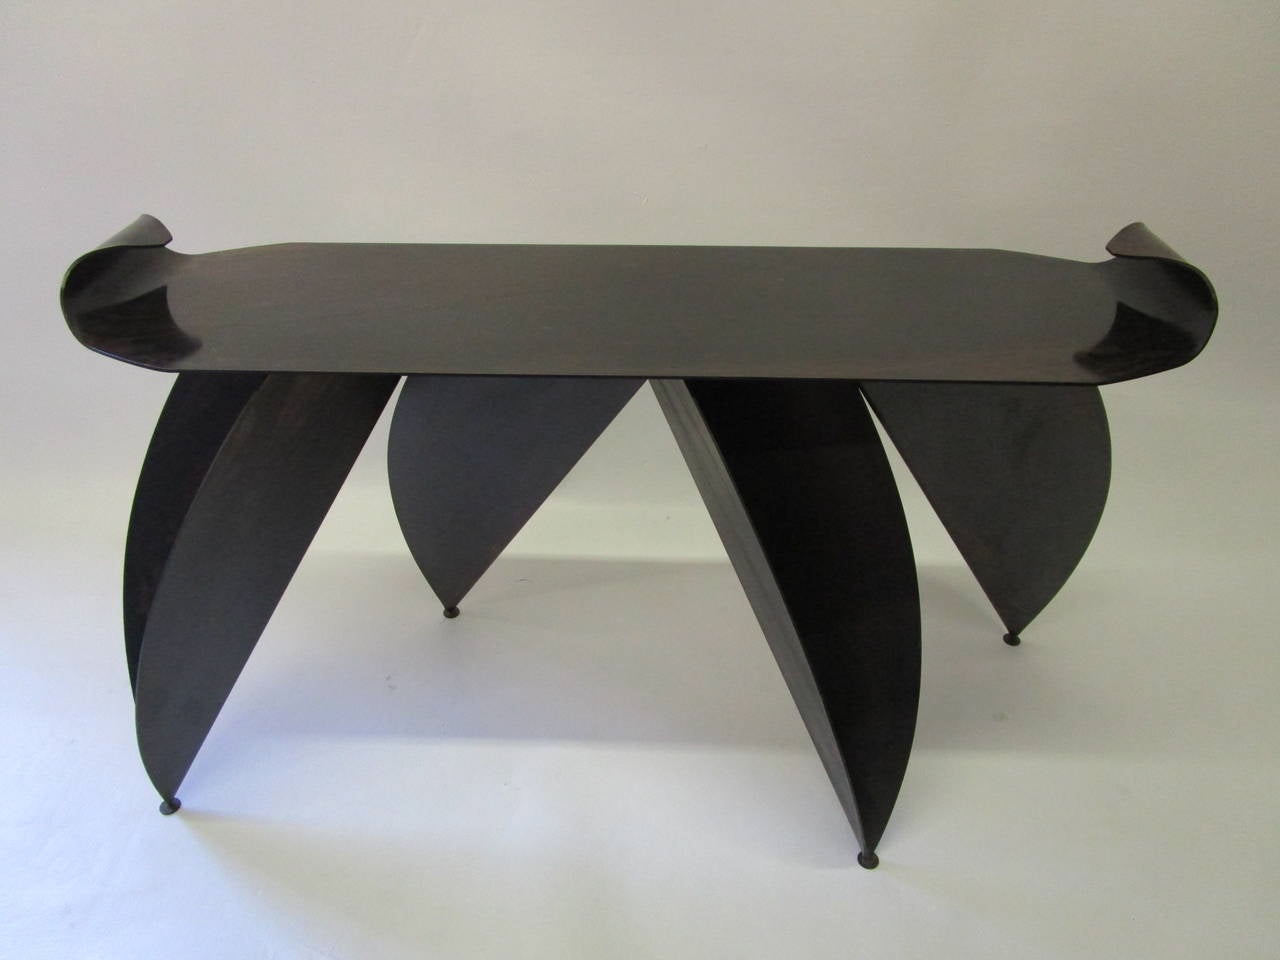 This console is the work of an artist. It is a strong and unique piece which looks like a big bug.
The legs are composed of four open metal sheets which support a metal top with curved edge ends. The patina on the whole piece is amazing. The